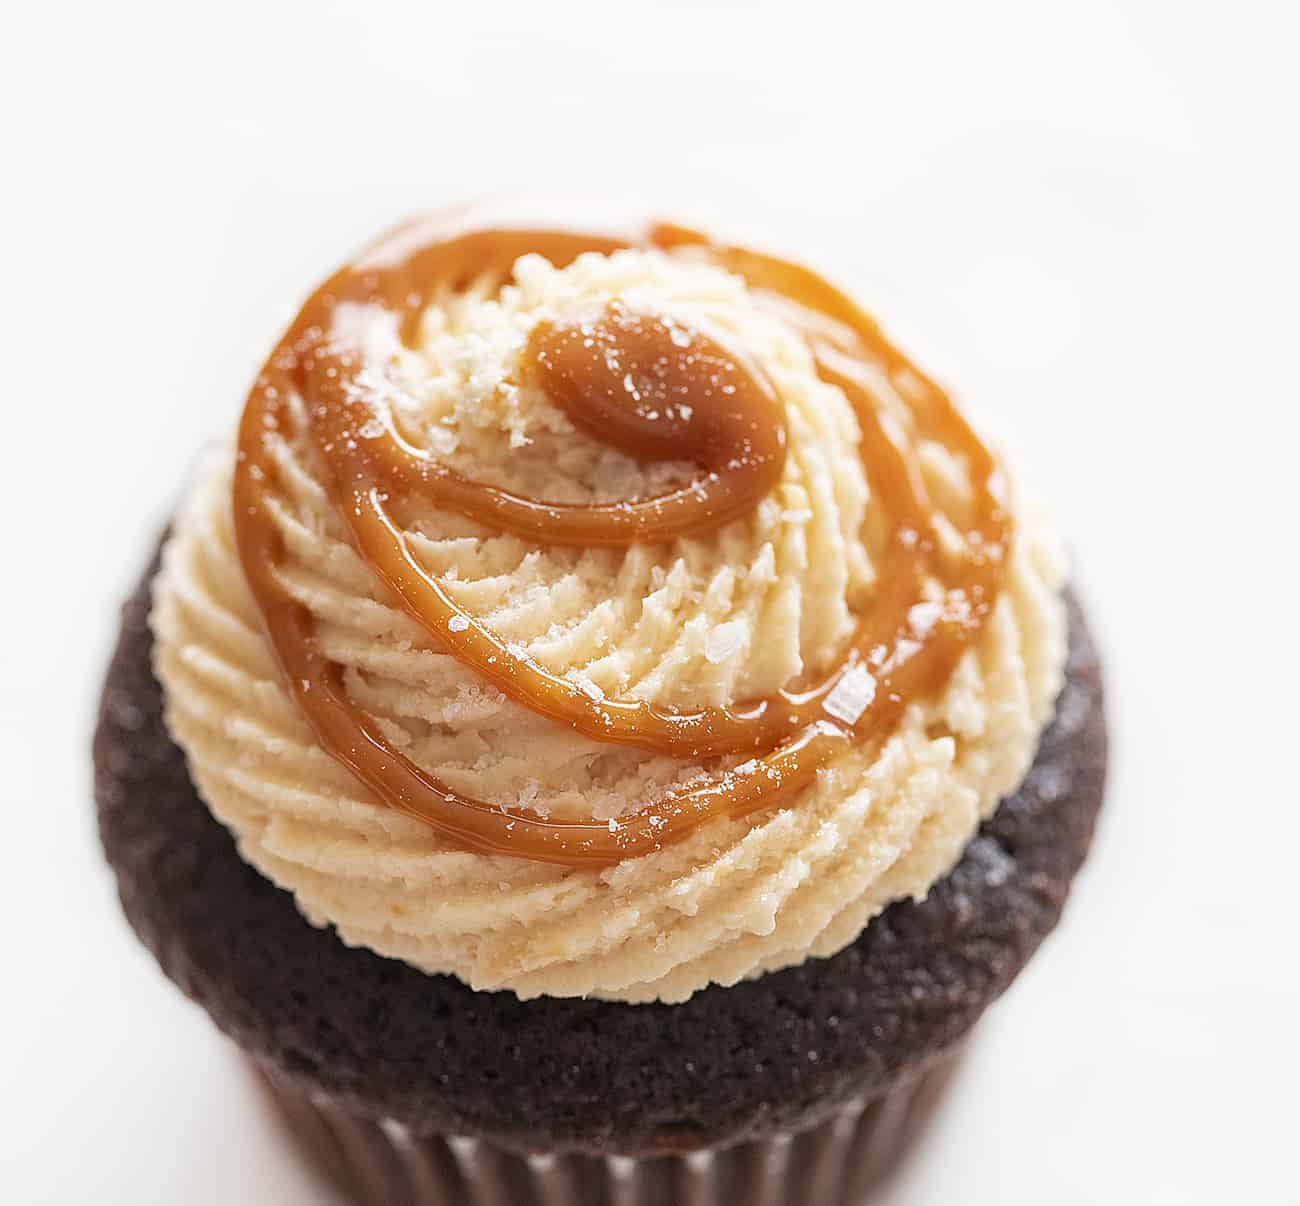 Chocolate Cupcakes with Salted Caramel Buttercream